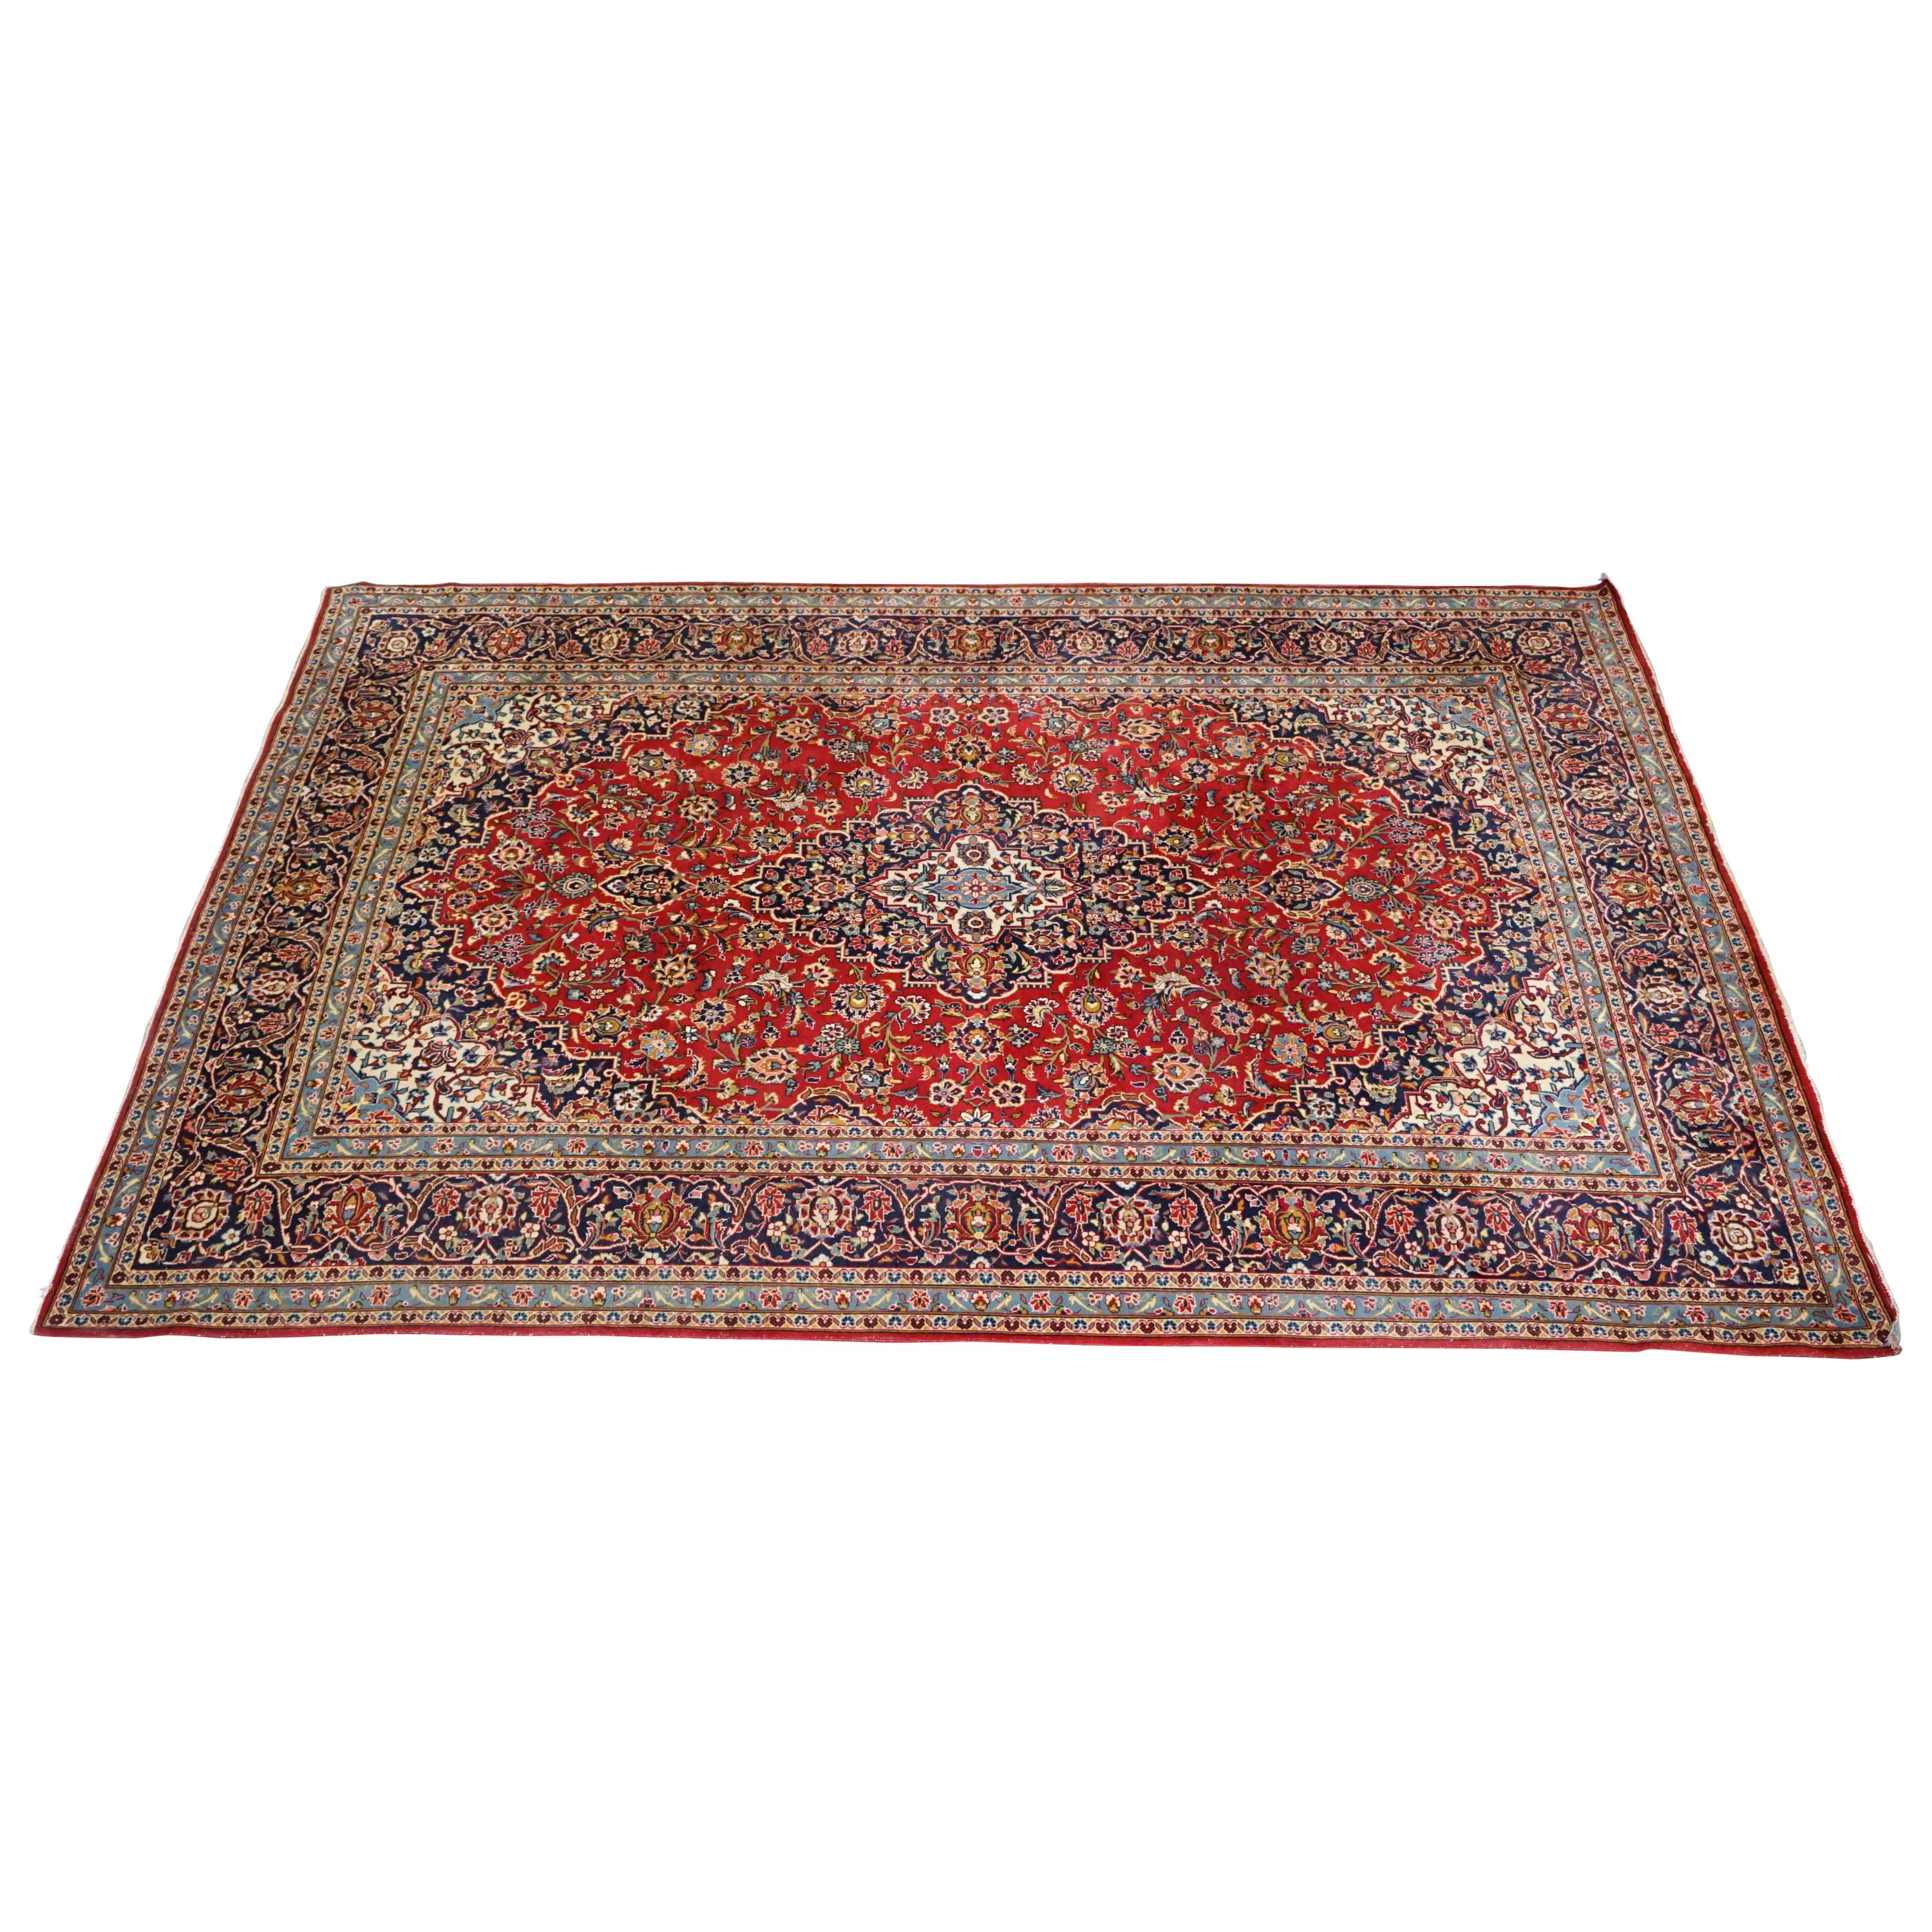 Liberty London Tabriz Garden Floral Rug Large Fine Hand Knotted For Sale